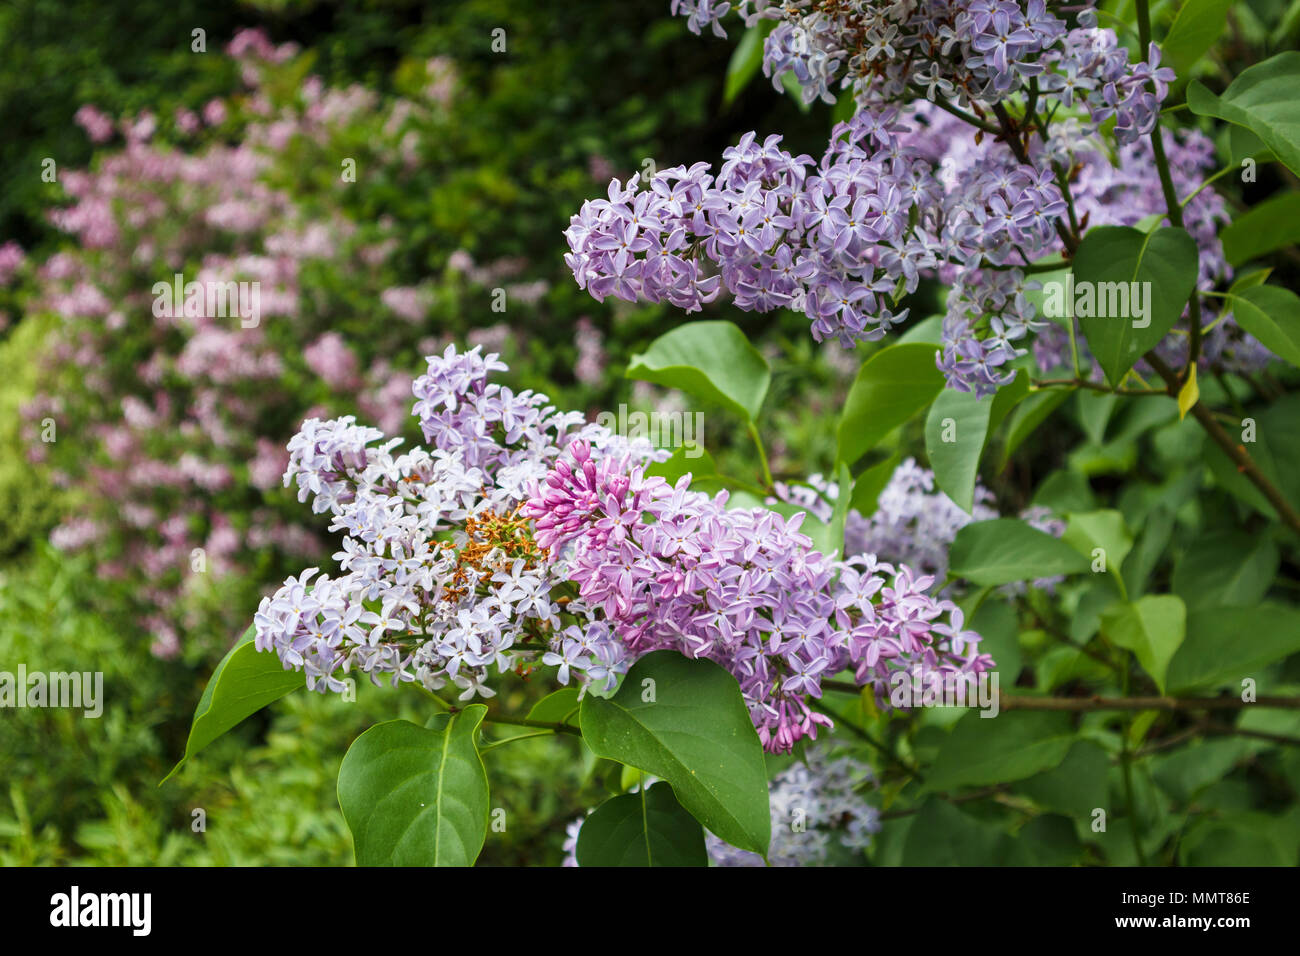 Purple - mauve sweet smelling fragrant common lilac (Syringa vulgaris) flower spikes close up in full bloom flowering in a Surrey garden in spring, UK Stock Photo